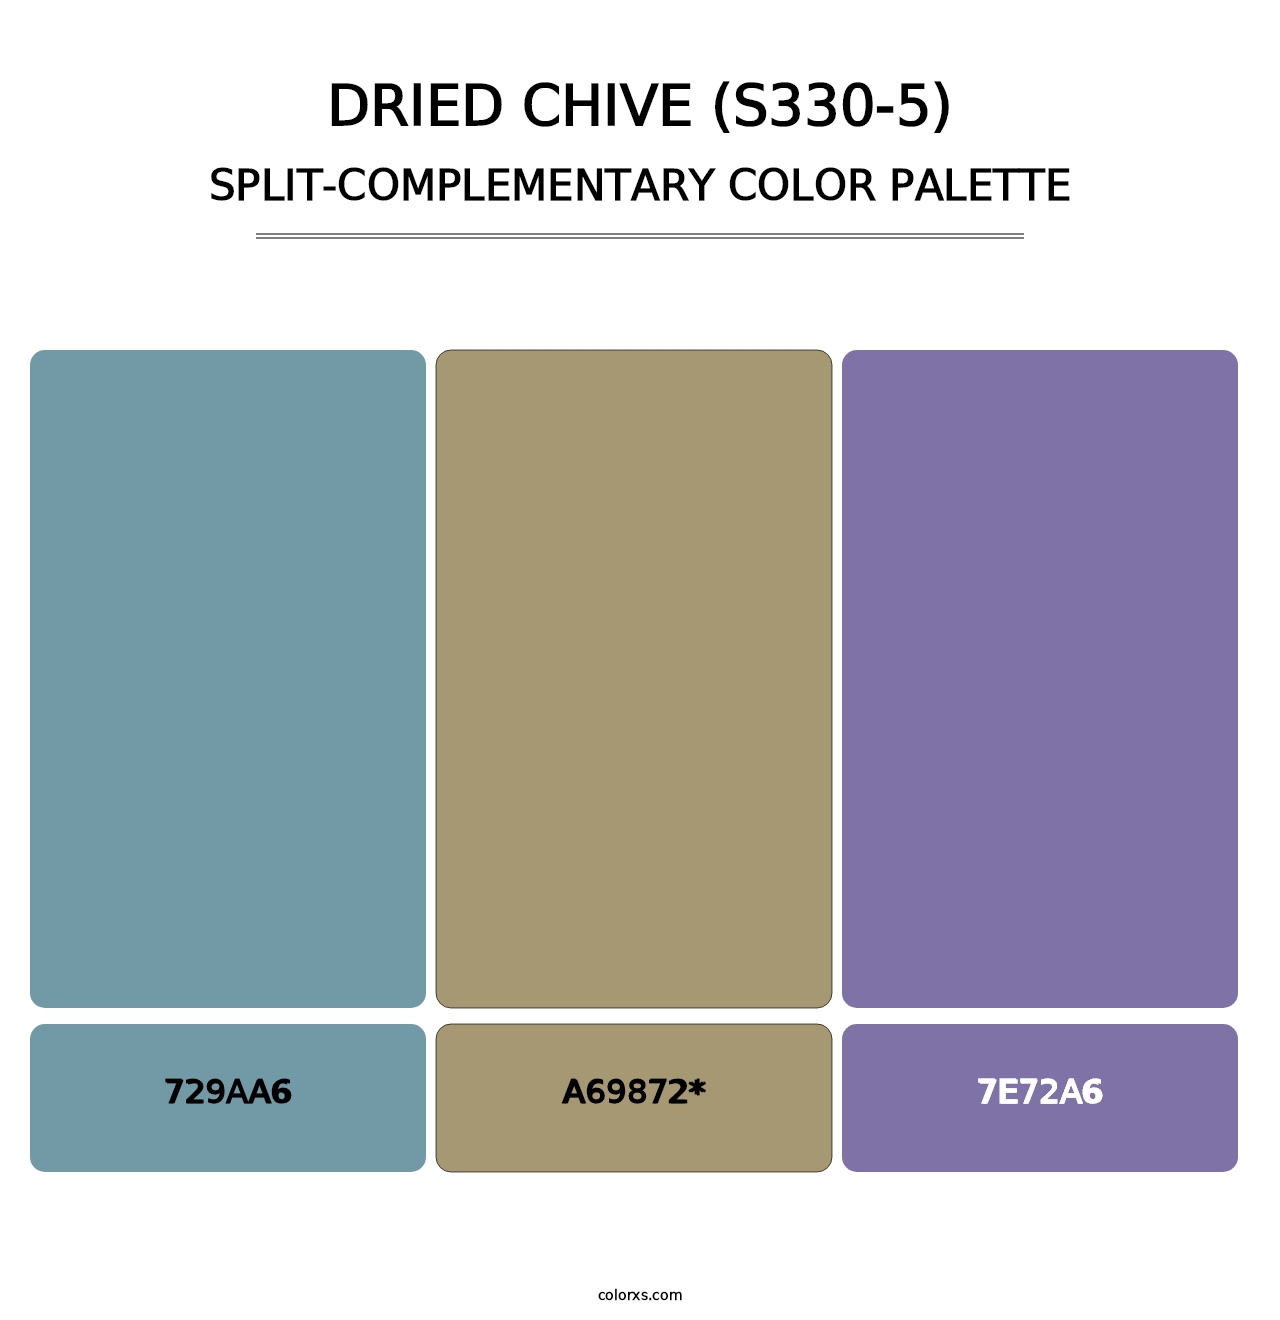 Dried Chive (S330-5) - Split-Complementary Color Palette